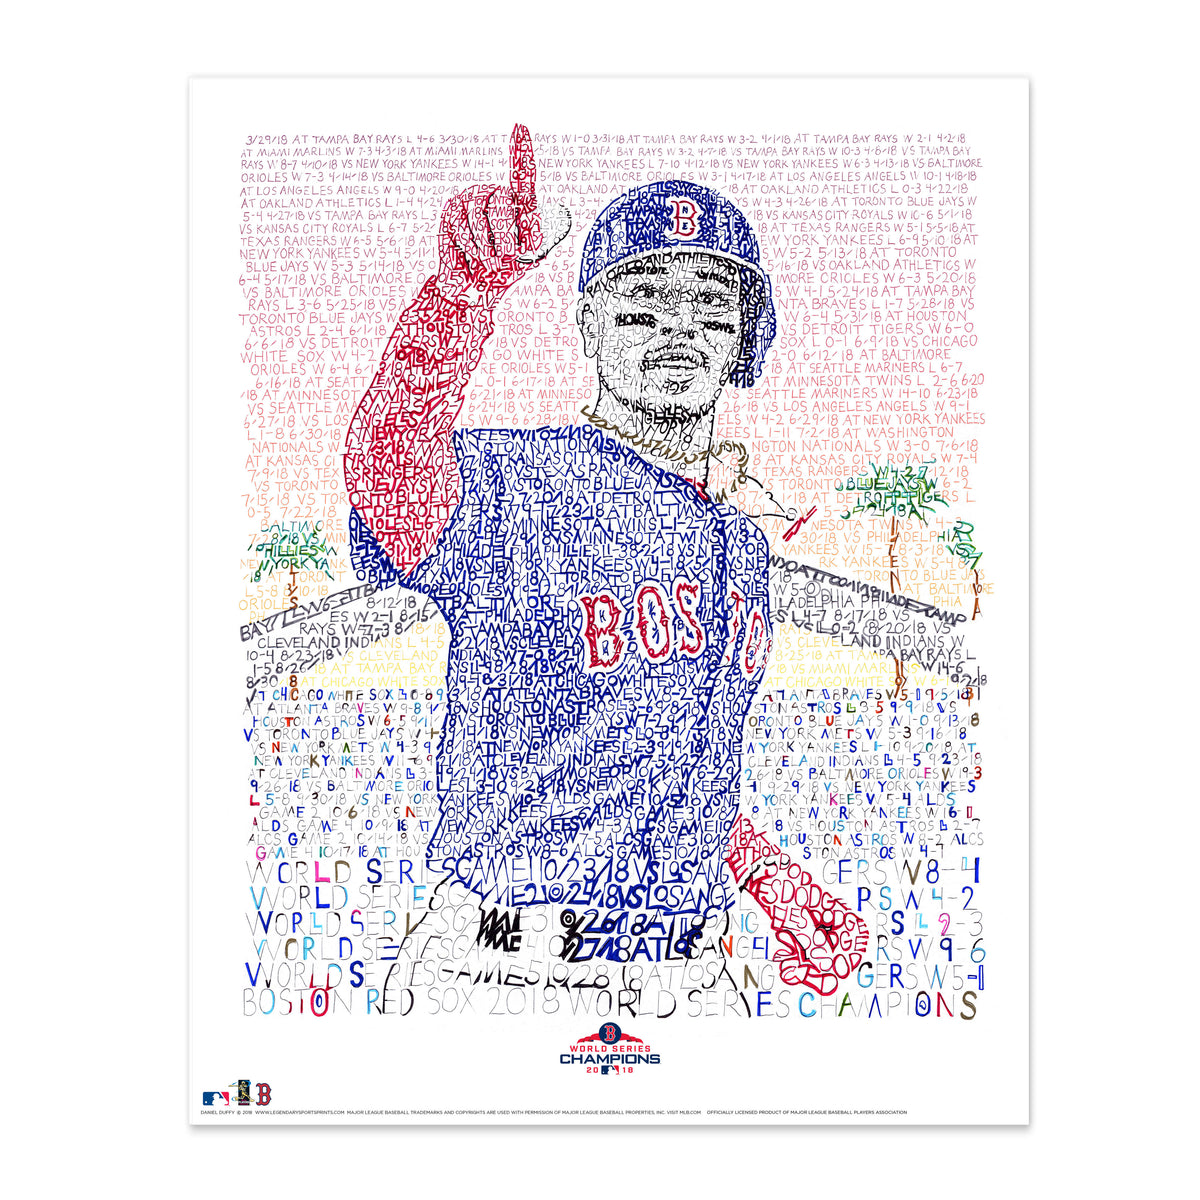 2018 World Series Gifts, Red Sox Art